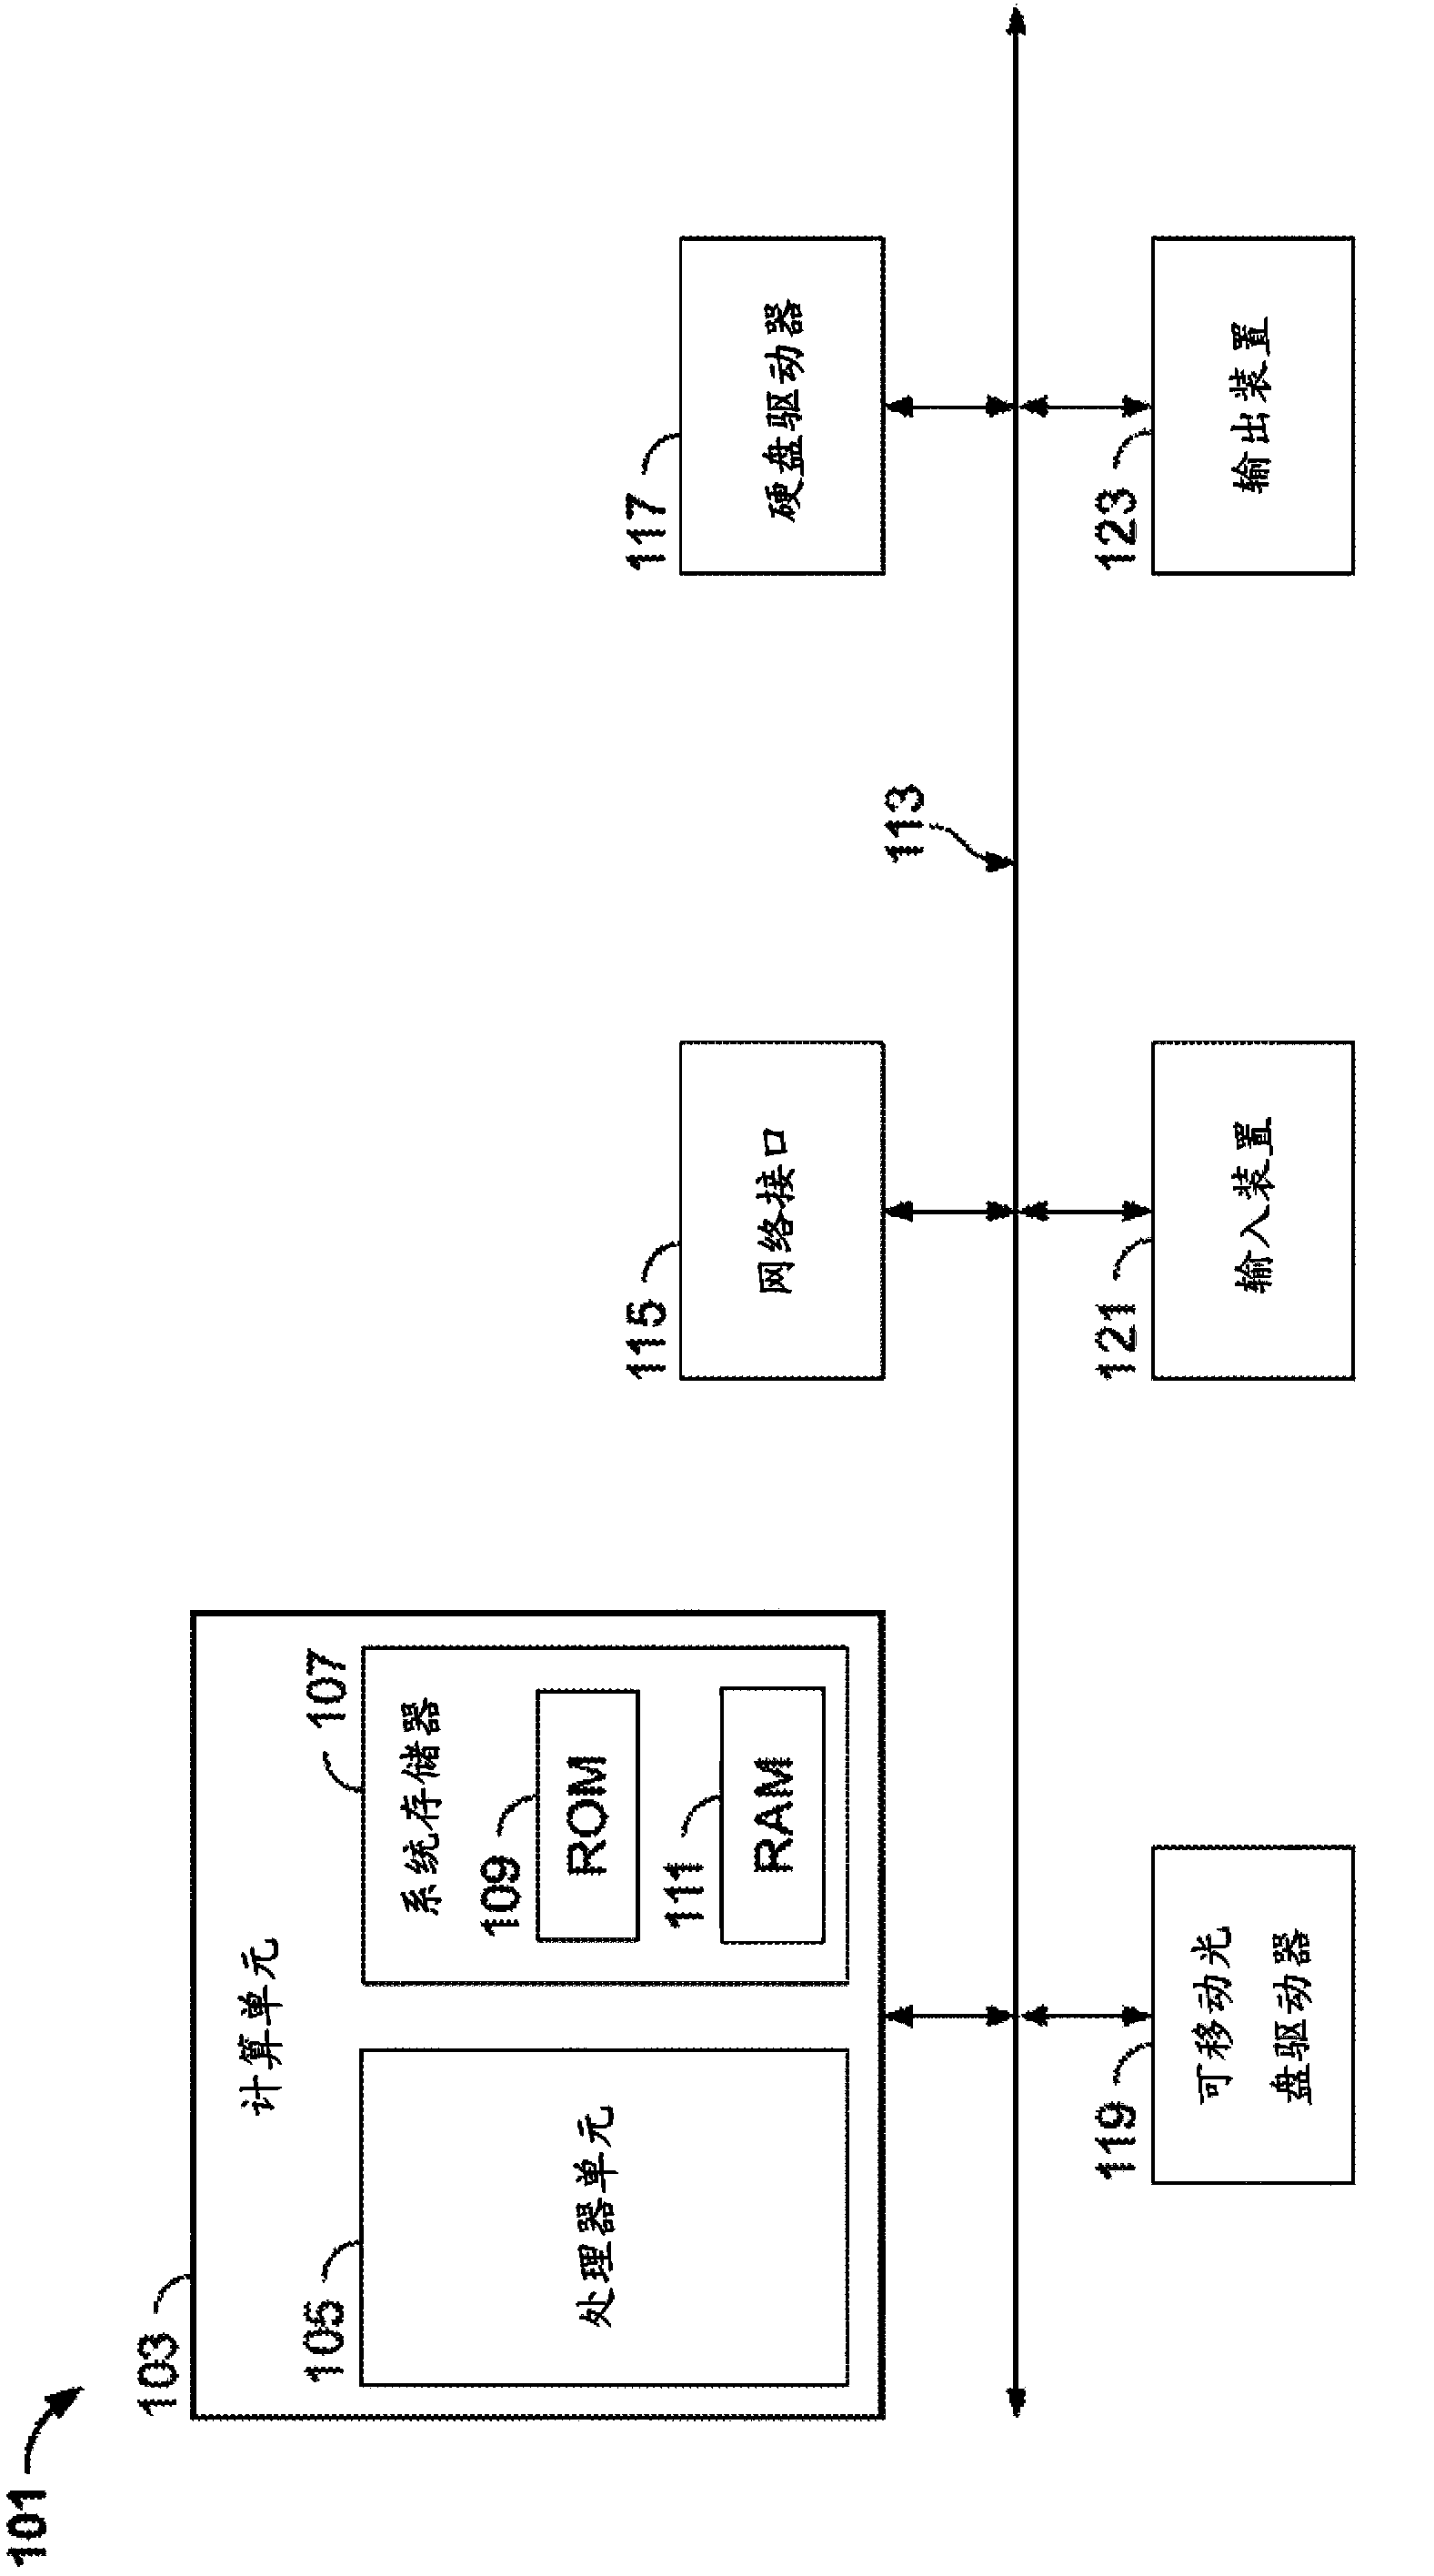 Systems and methods for time-based athletic activity measurement and display